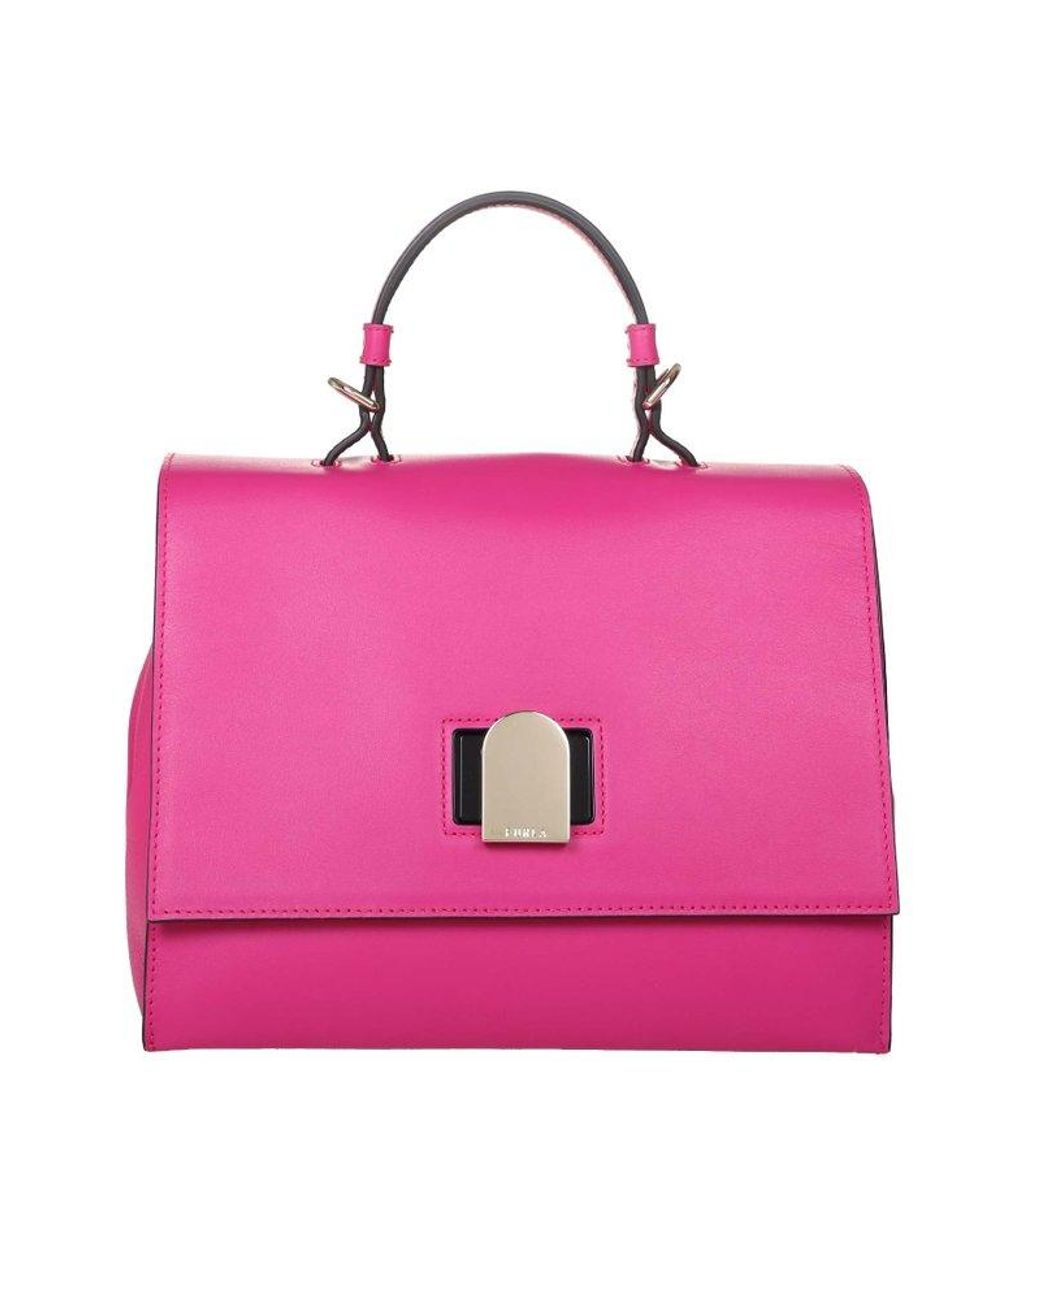 Etro Leather Handbag in Fuchsia Red - Save 35% Womens Bags Tote bags 